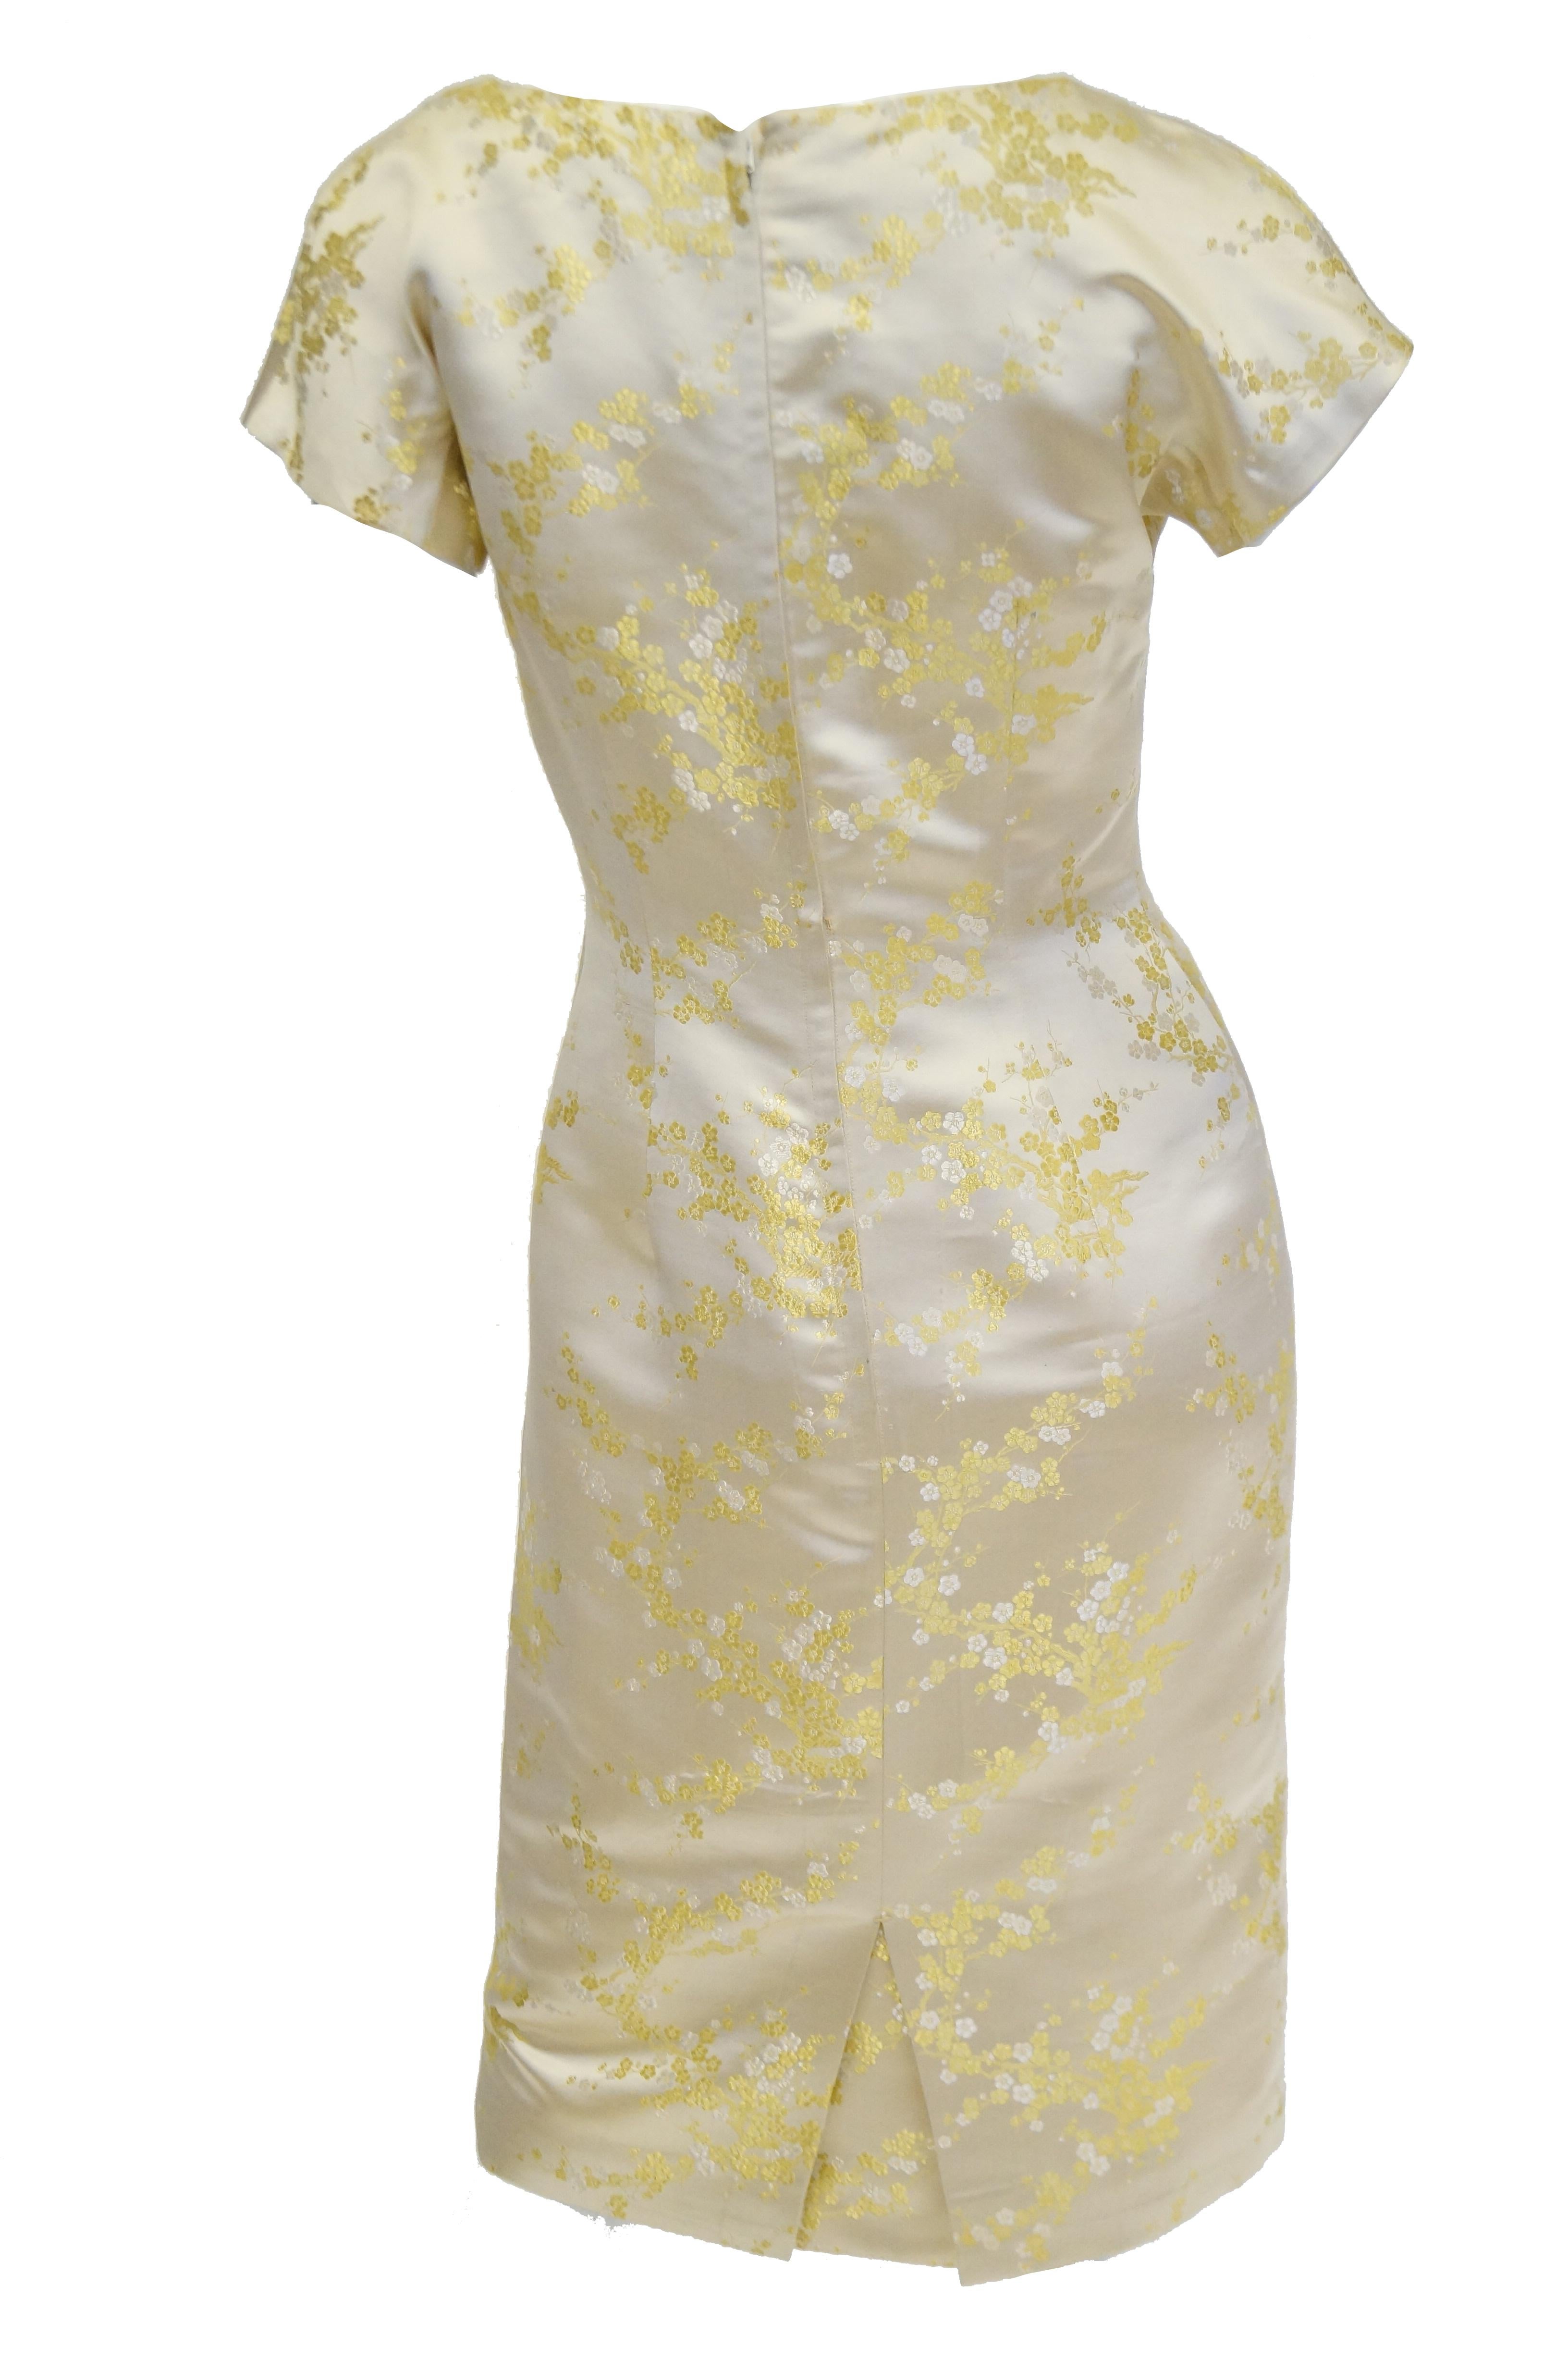  1960s Hong Kong Gold Cherry Blossom Floral Brocade Cocktail Dress and Coat In Excellent Condition For Sale In Houston, TX